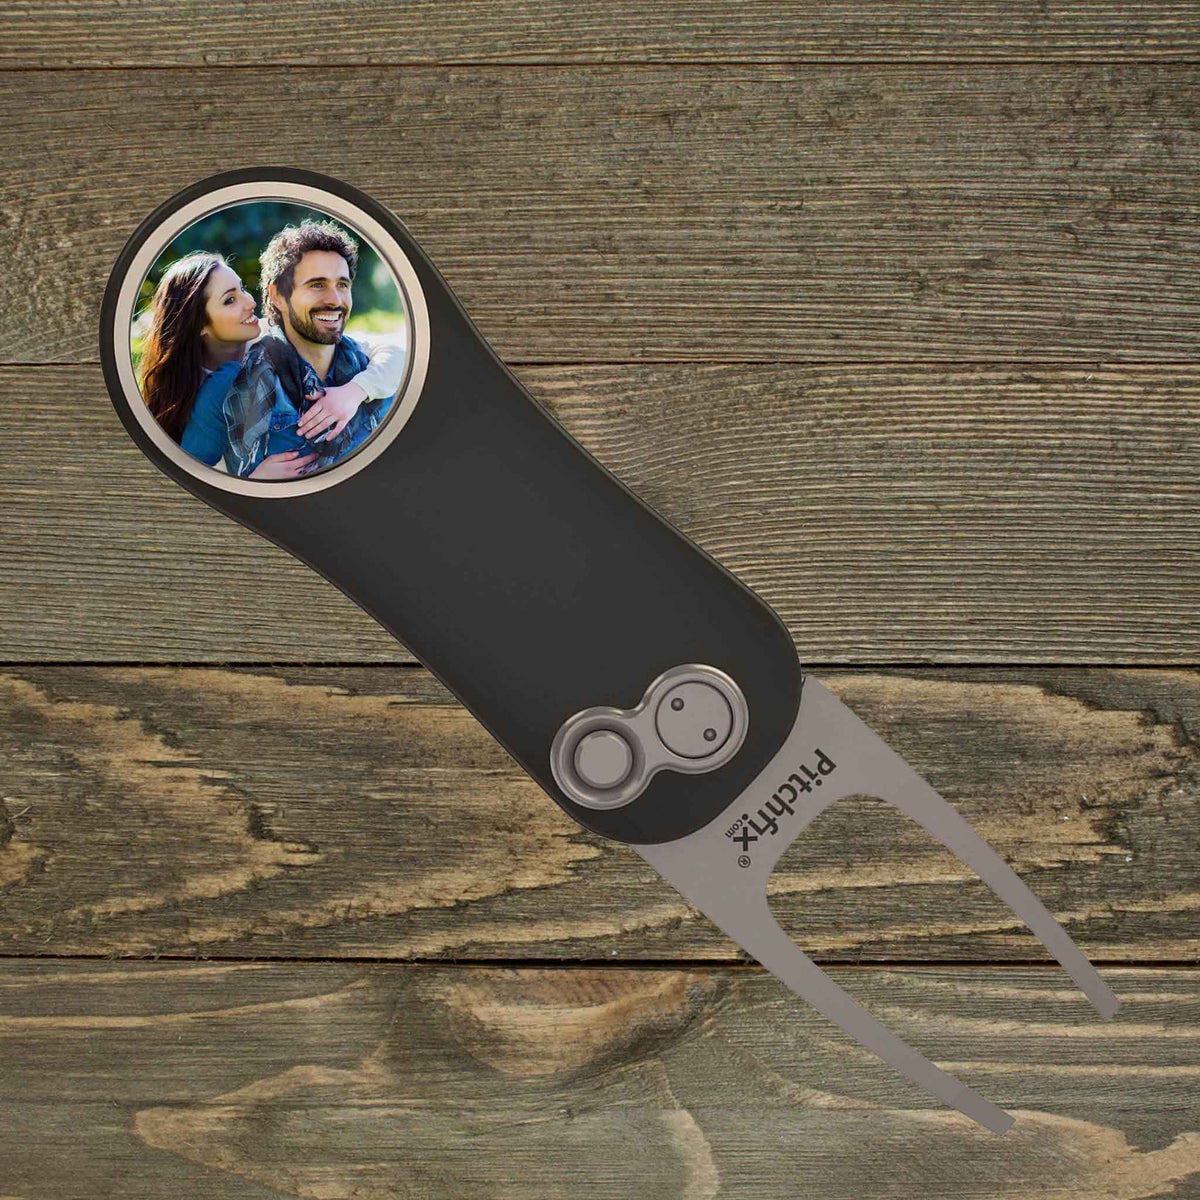 Personalized PitchFix Divot Tool | Golf Accessories | Golf Gifts | Custom Photo Family